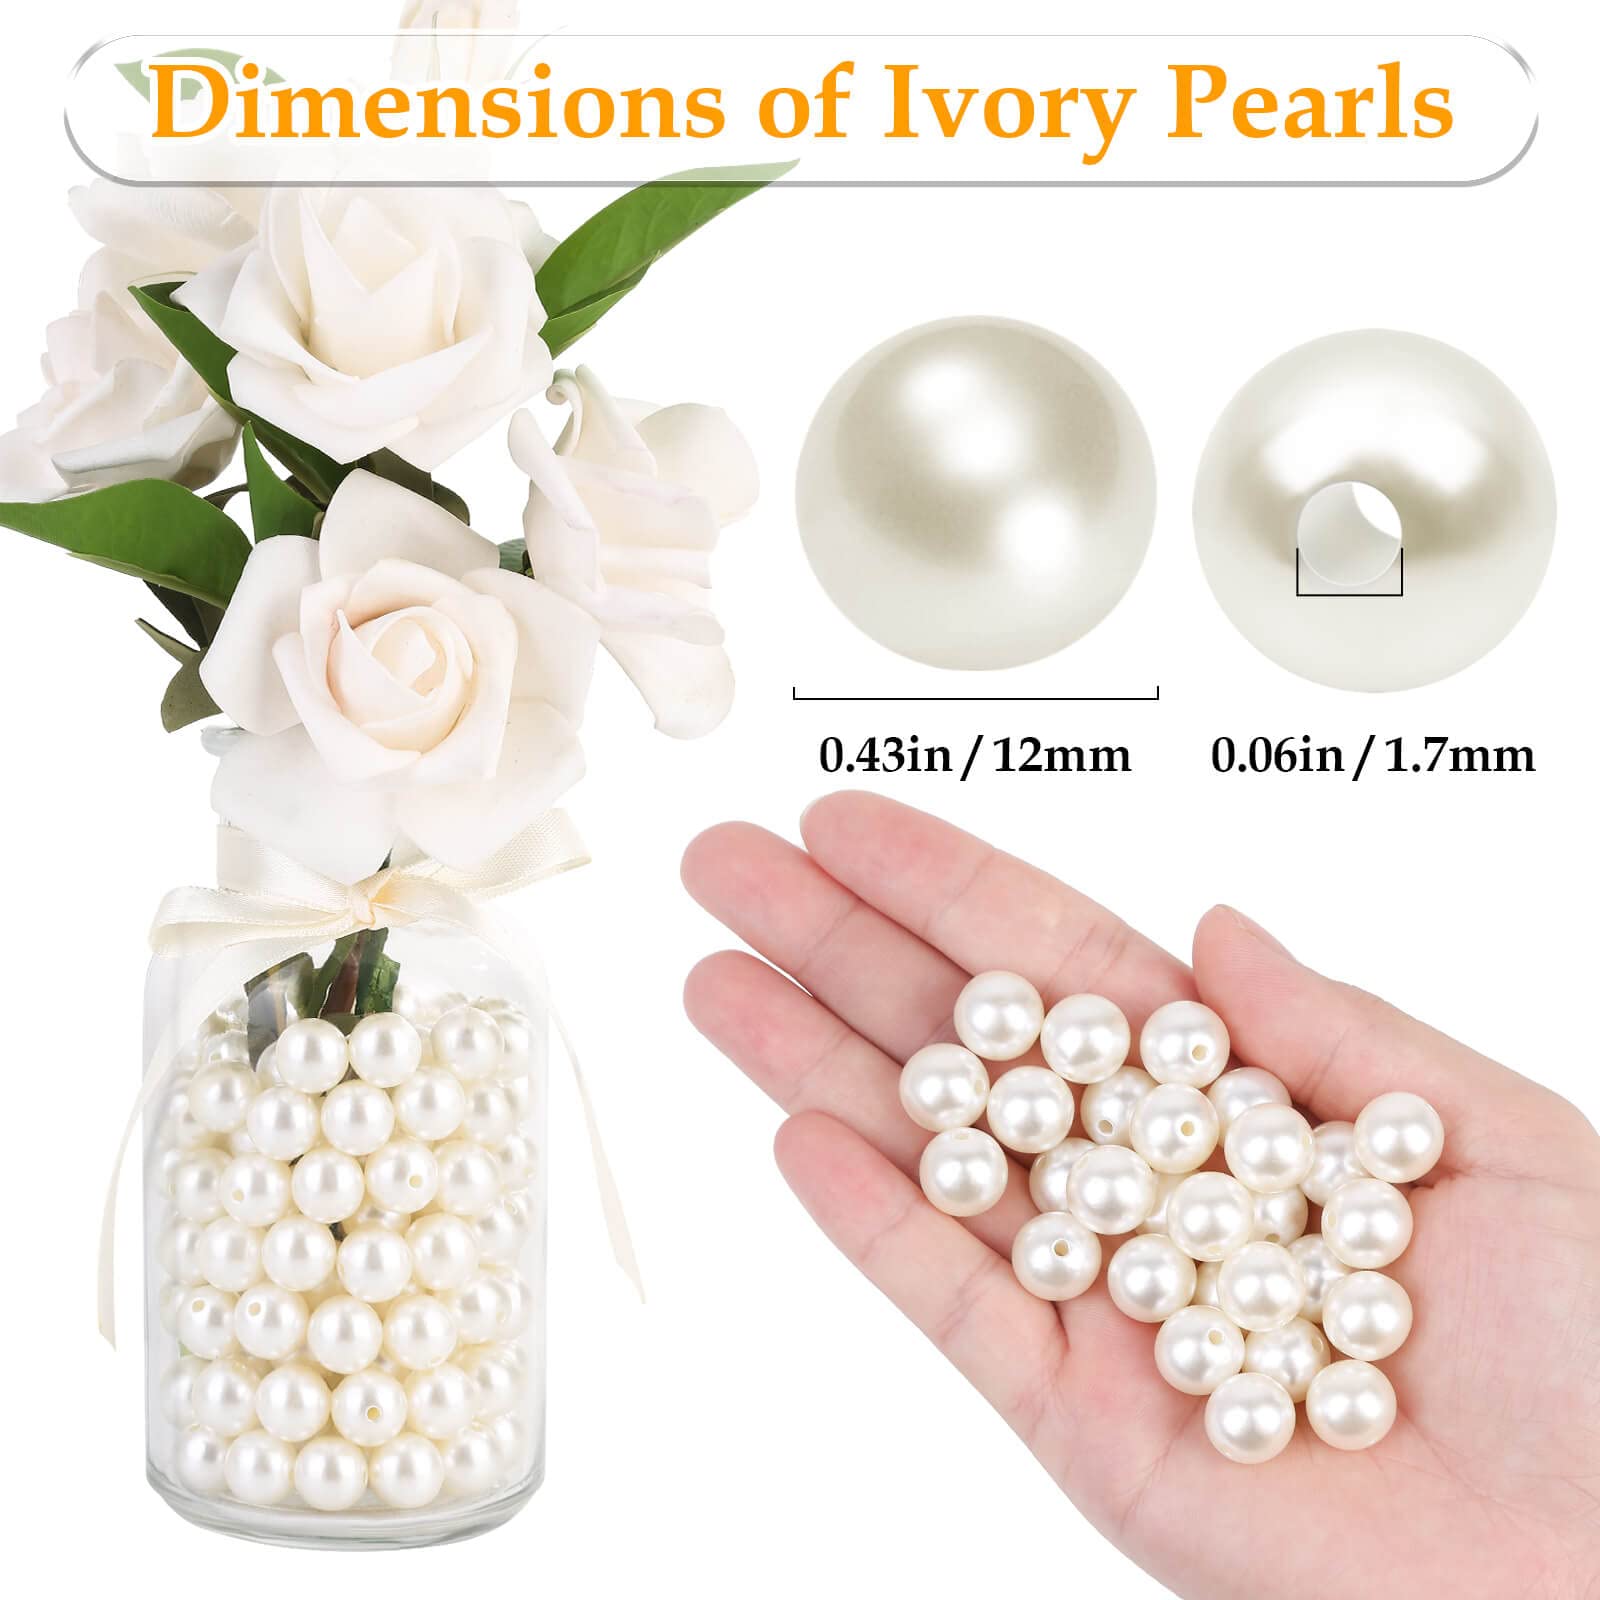 [7500 PCS] Pearl Beads, 4MM Round Small Pearl Beads Craft Loose Beads Faux  White Pearls Bead for Beading Jewelry Making, DIY Craft, Vase Fillers, Home